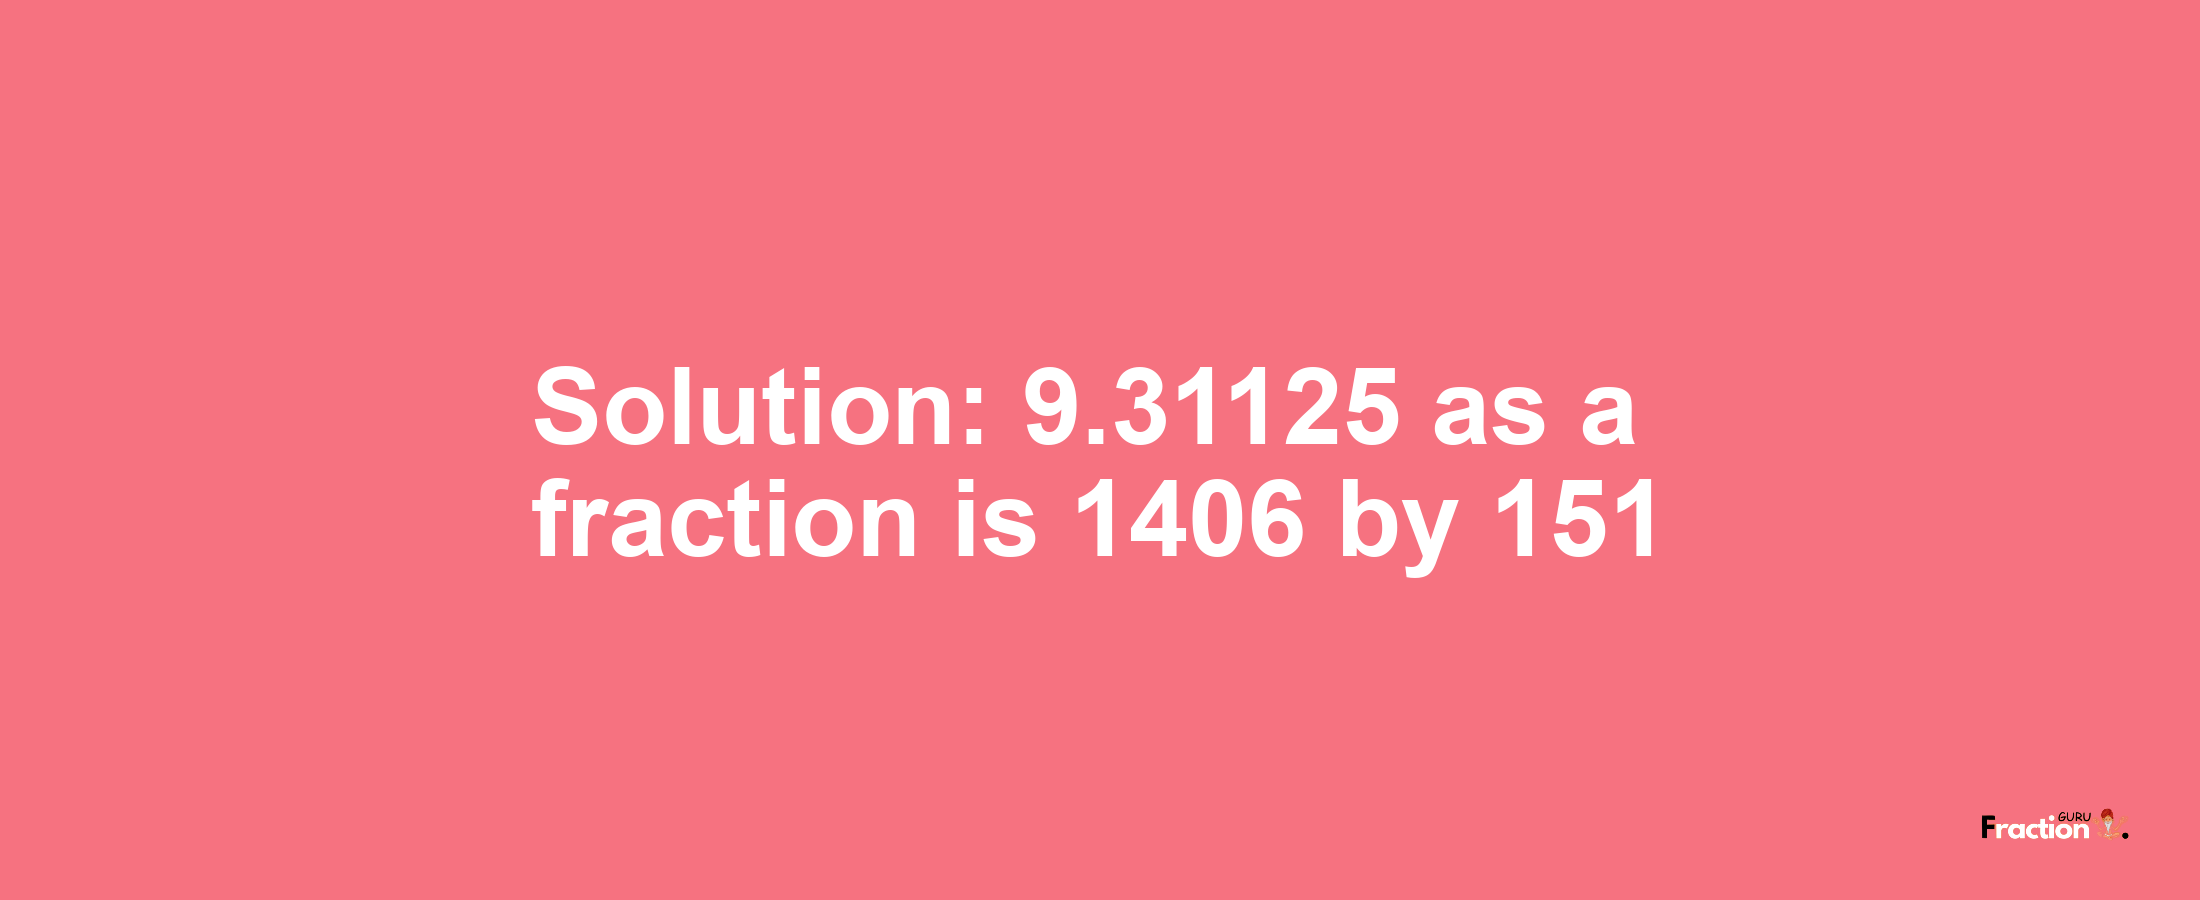 Solution:9.31125 as a fraction is 1406/151